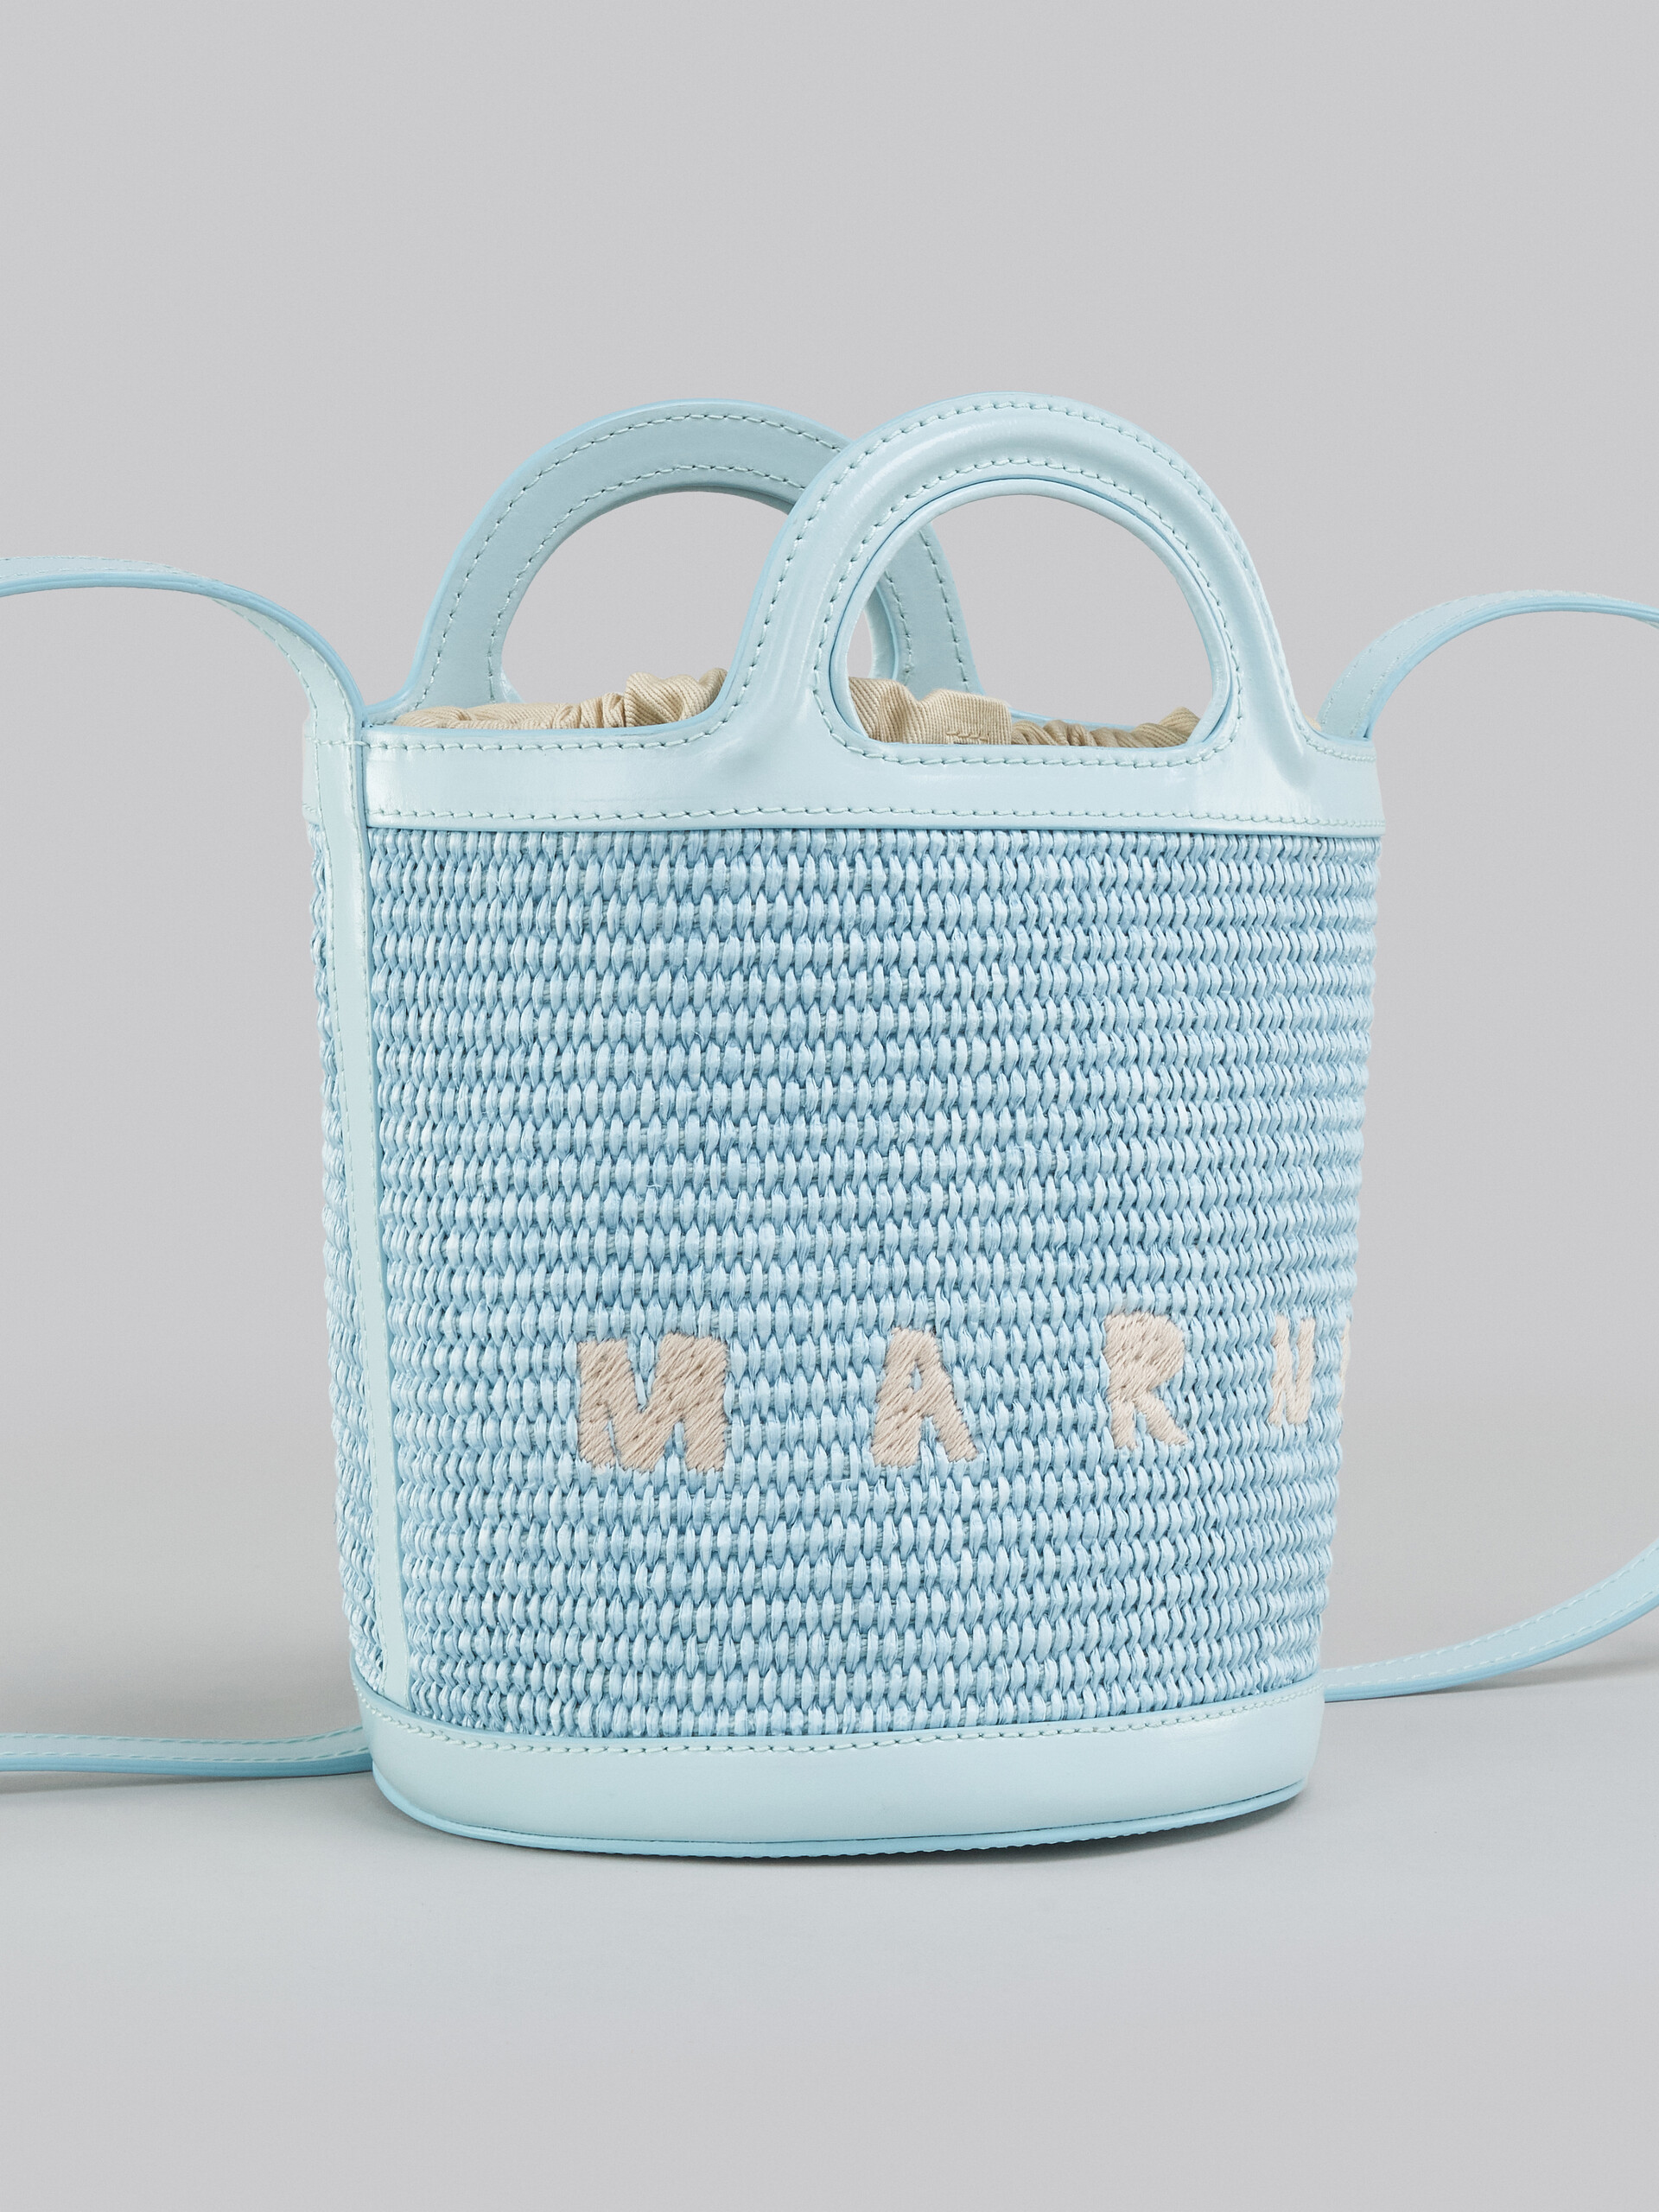 Tropicalia Small Bucket Bag in light blue leather and raffia - Shoulder Bags - Image 5